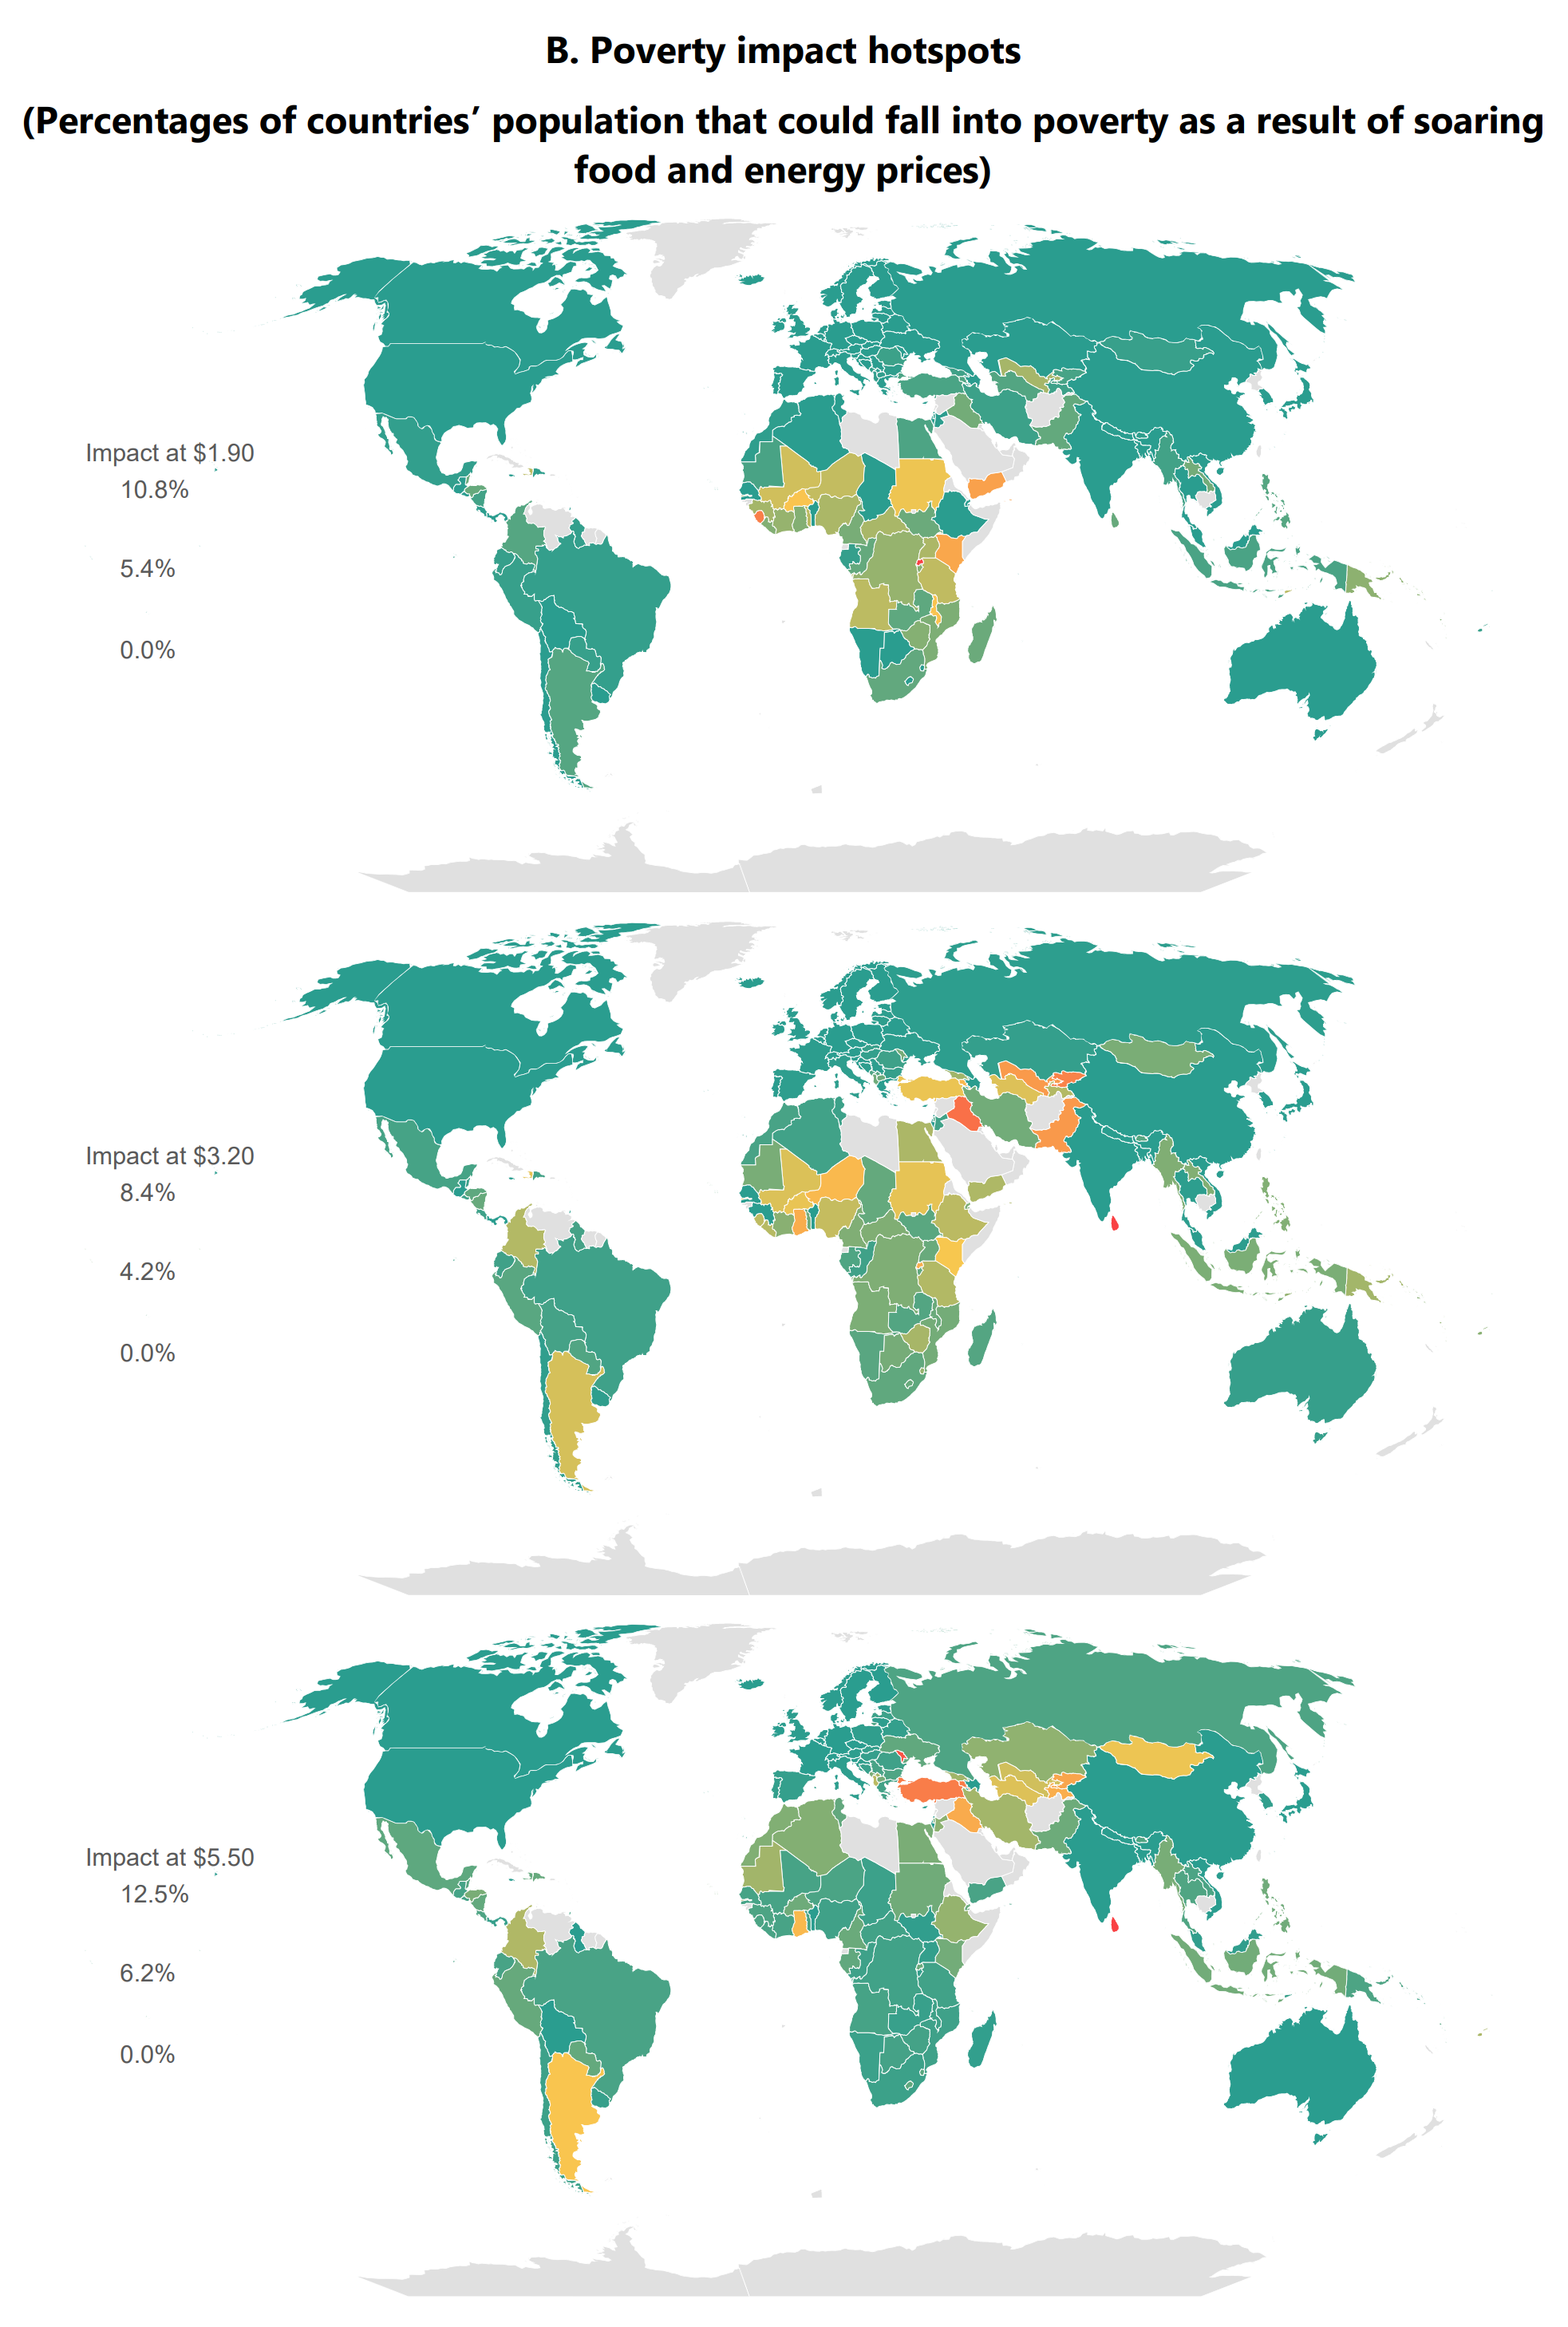 Maps showing poverty impact hotspots as percentages of countries’ population that could fall into poverty as a result of soaring food and energy prices. Among those countries likely facing high poverty impacts across all poverty lines are Armenia and Uzbekistan in the Caspian Basin; Burkina Faso, Ghana, Kenya, Rwanda and Sudan in Sub-Saharan Africa; Haiti in Latin America; and Pakistan and Sri Lanka in South Asia. In these countries, around 3 percent of the population, on average, could fall into poverty. In Ethiopia, Mali, Nigeria, Sierra Leone, Tanzania and Yemen, the impacts could be particularly hard at the lowest poverty lines, whereas in Albania, Kyrgyz Republic, Moldova, Mongolia, Tajikistan, and Ukraine, the hits could be hardest at $5.50 a day.7 Clear geographical hotspots, depending on the poverty line, emerge in Sub-Saharan Africa, mainly in the Sahel region, the Balkans and the Caspian Basin. Graphic: UNDP